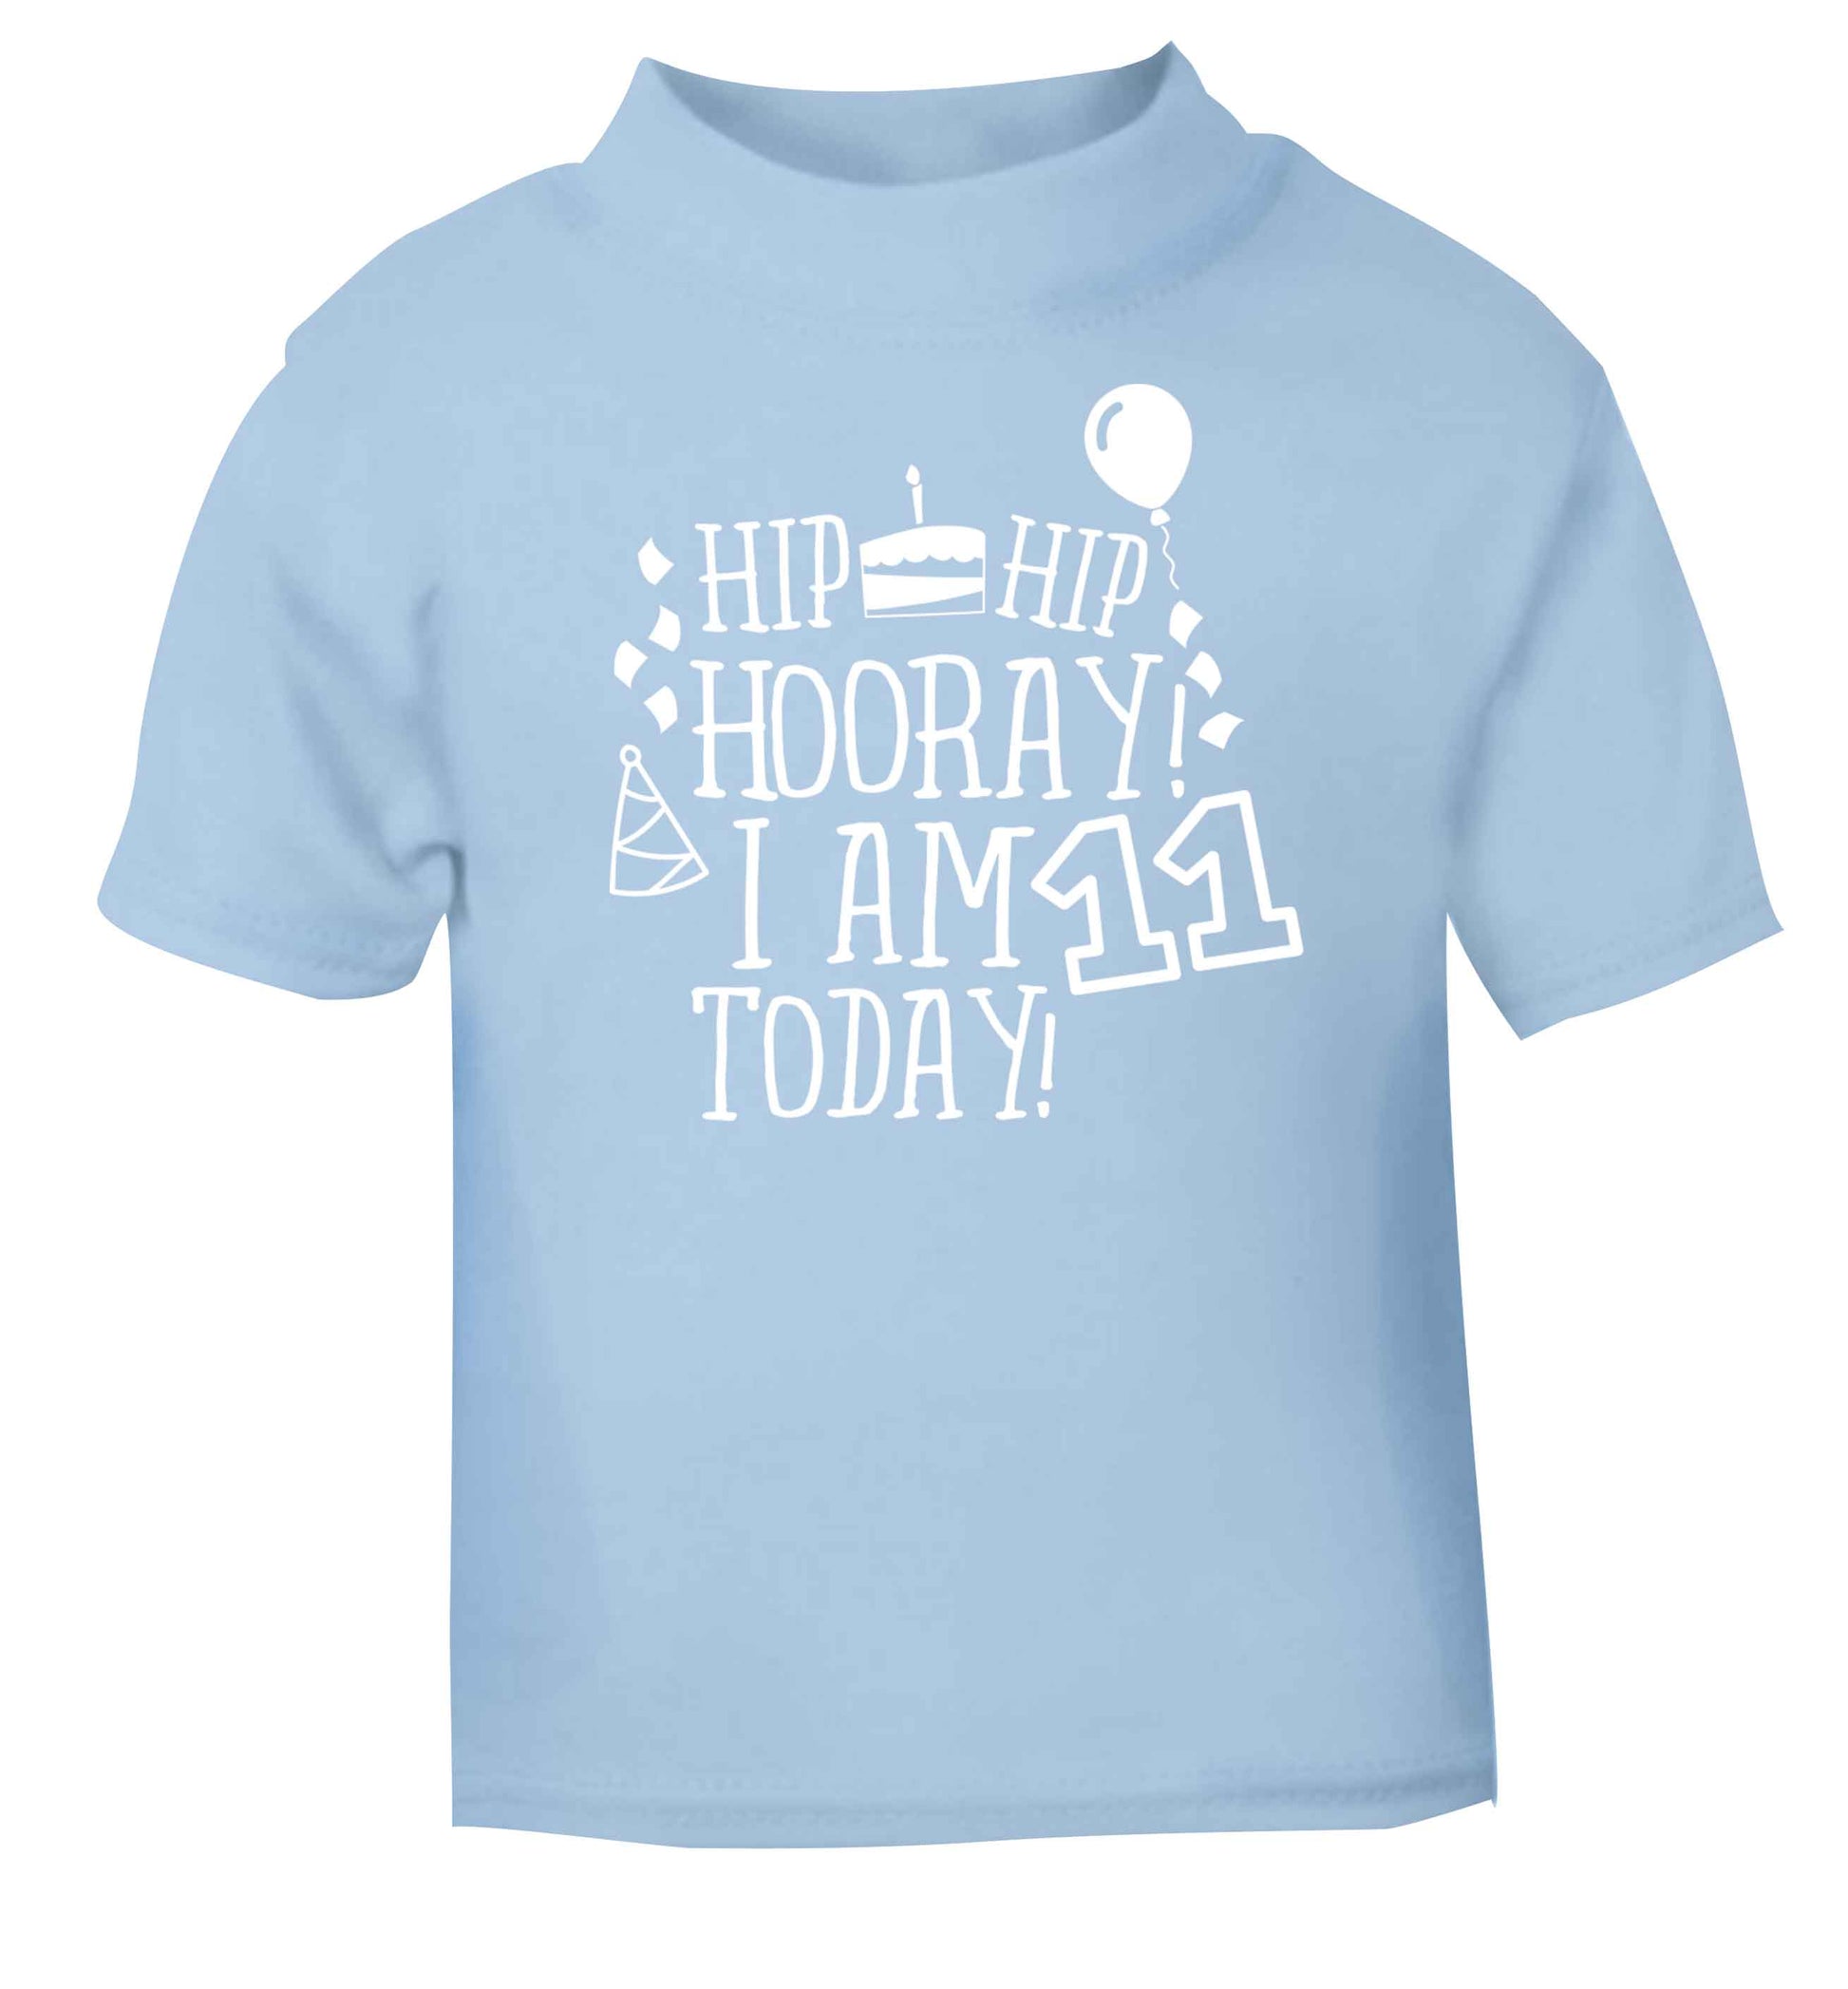 Hip hip hooray I am eleven today! light blue baby toddler Tshirt 2 Years